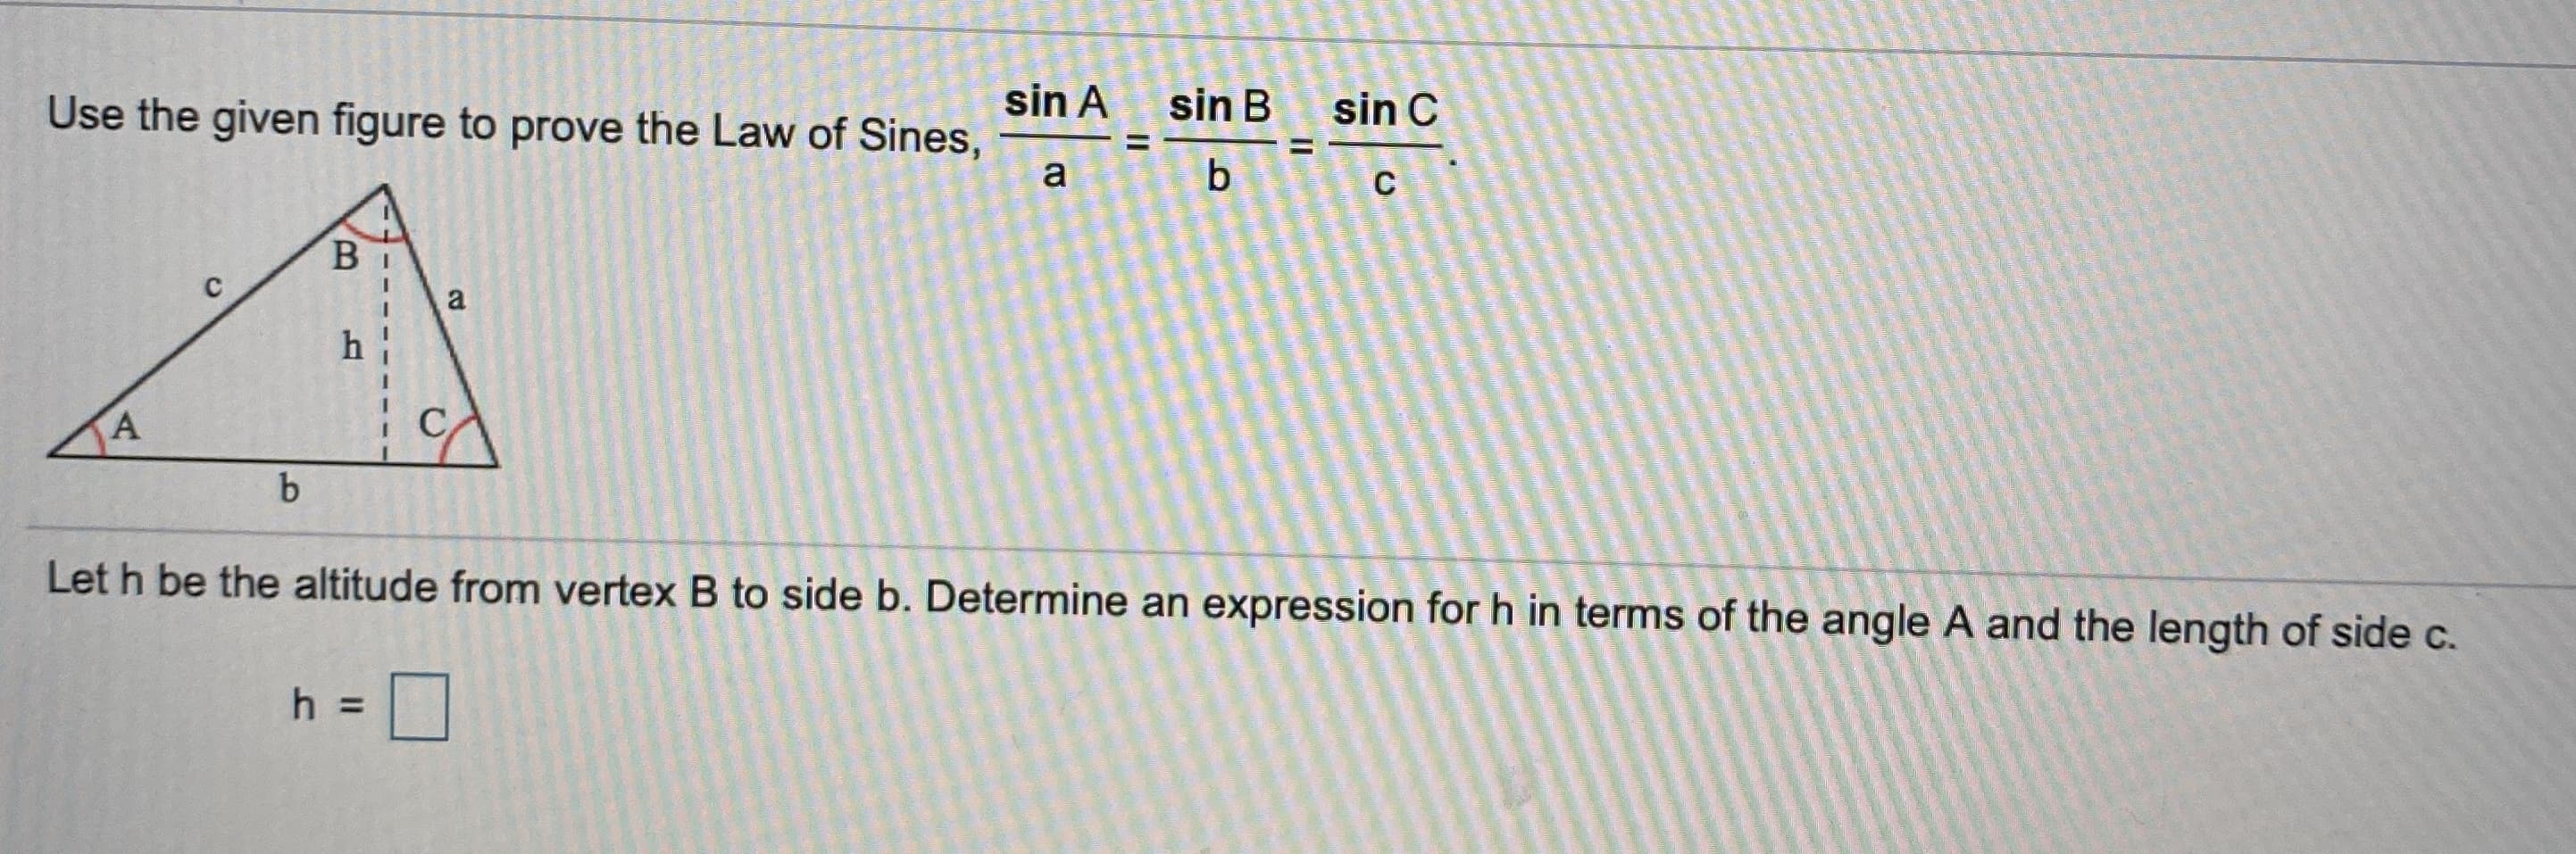 Use the given figure to prove the Law of Sines,
sin A
sin B
sin C
a
b.
B
a
h
A
C,
b
Let h be the altitude from vertex B to side b. Determine an expression for h in terms of the angle A and the length of side c.
h =
